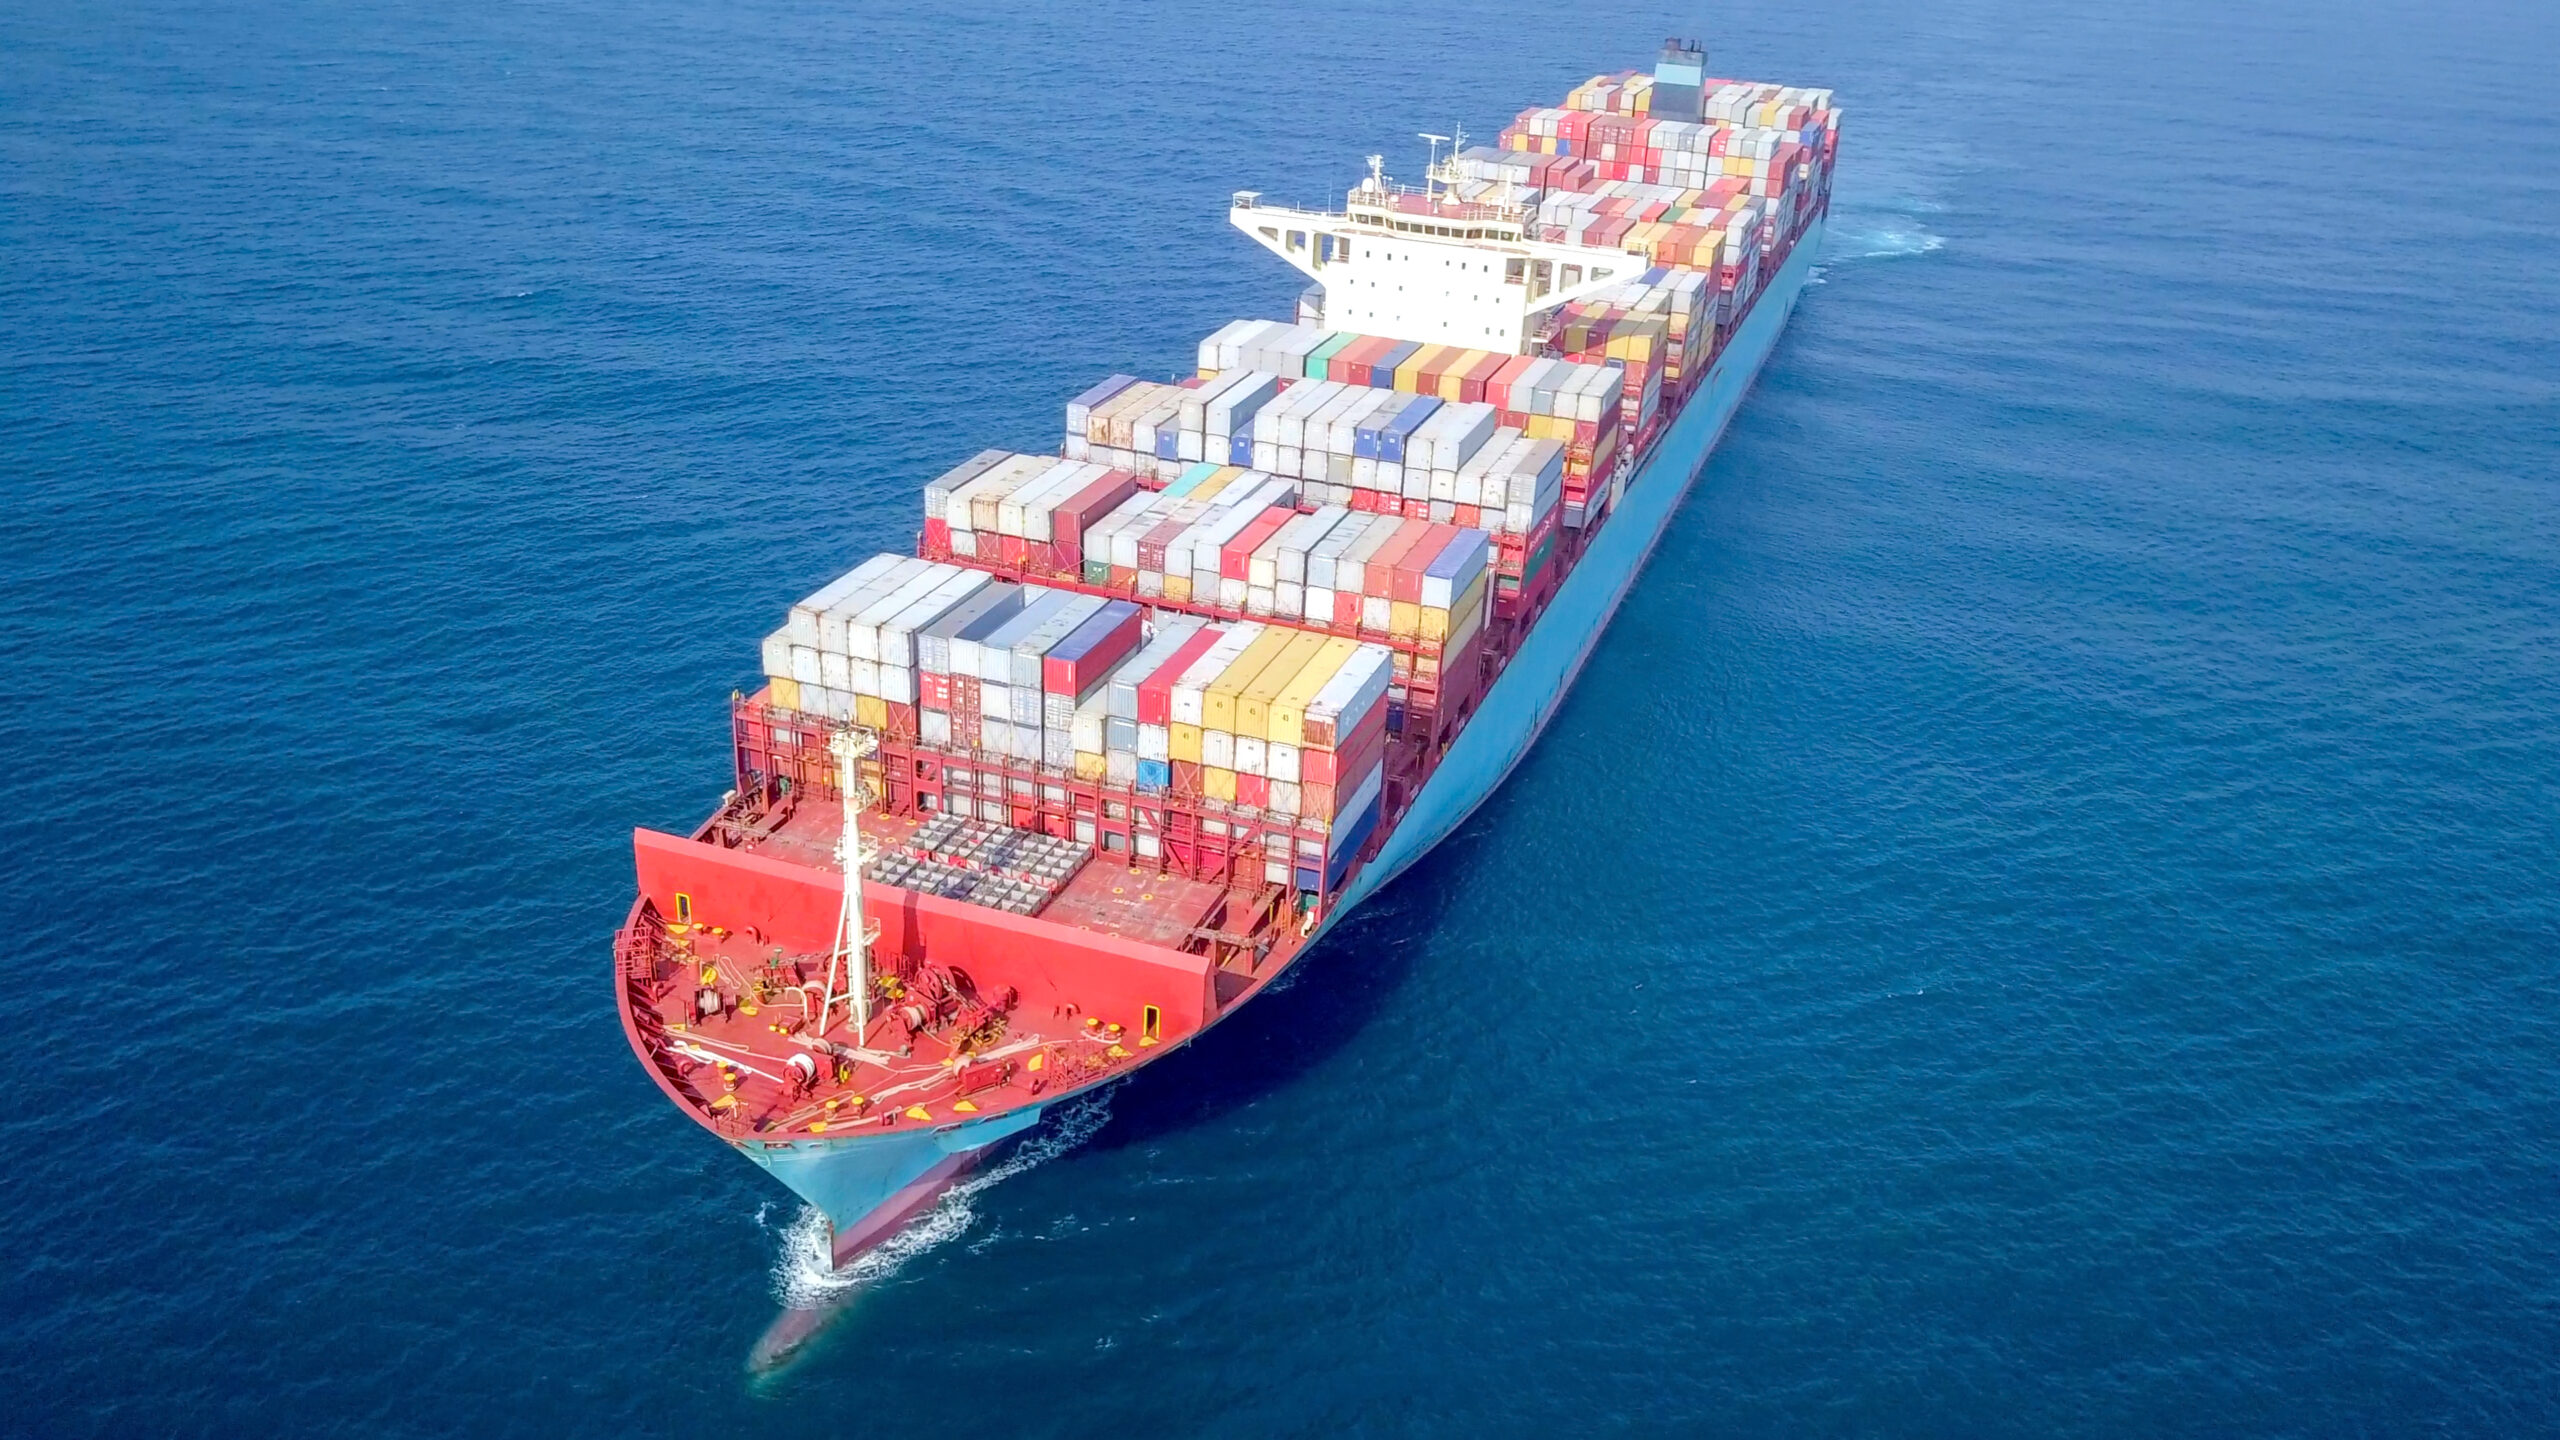 Large container ship at sea - Low angle aerial image.